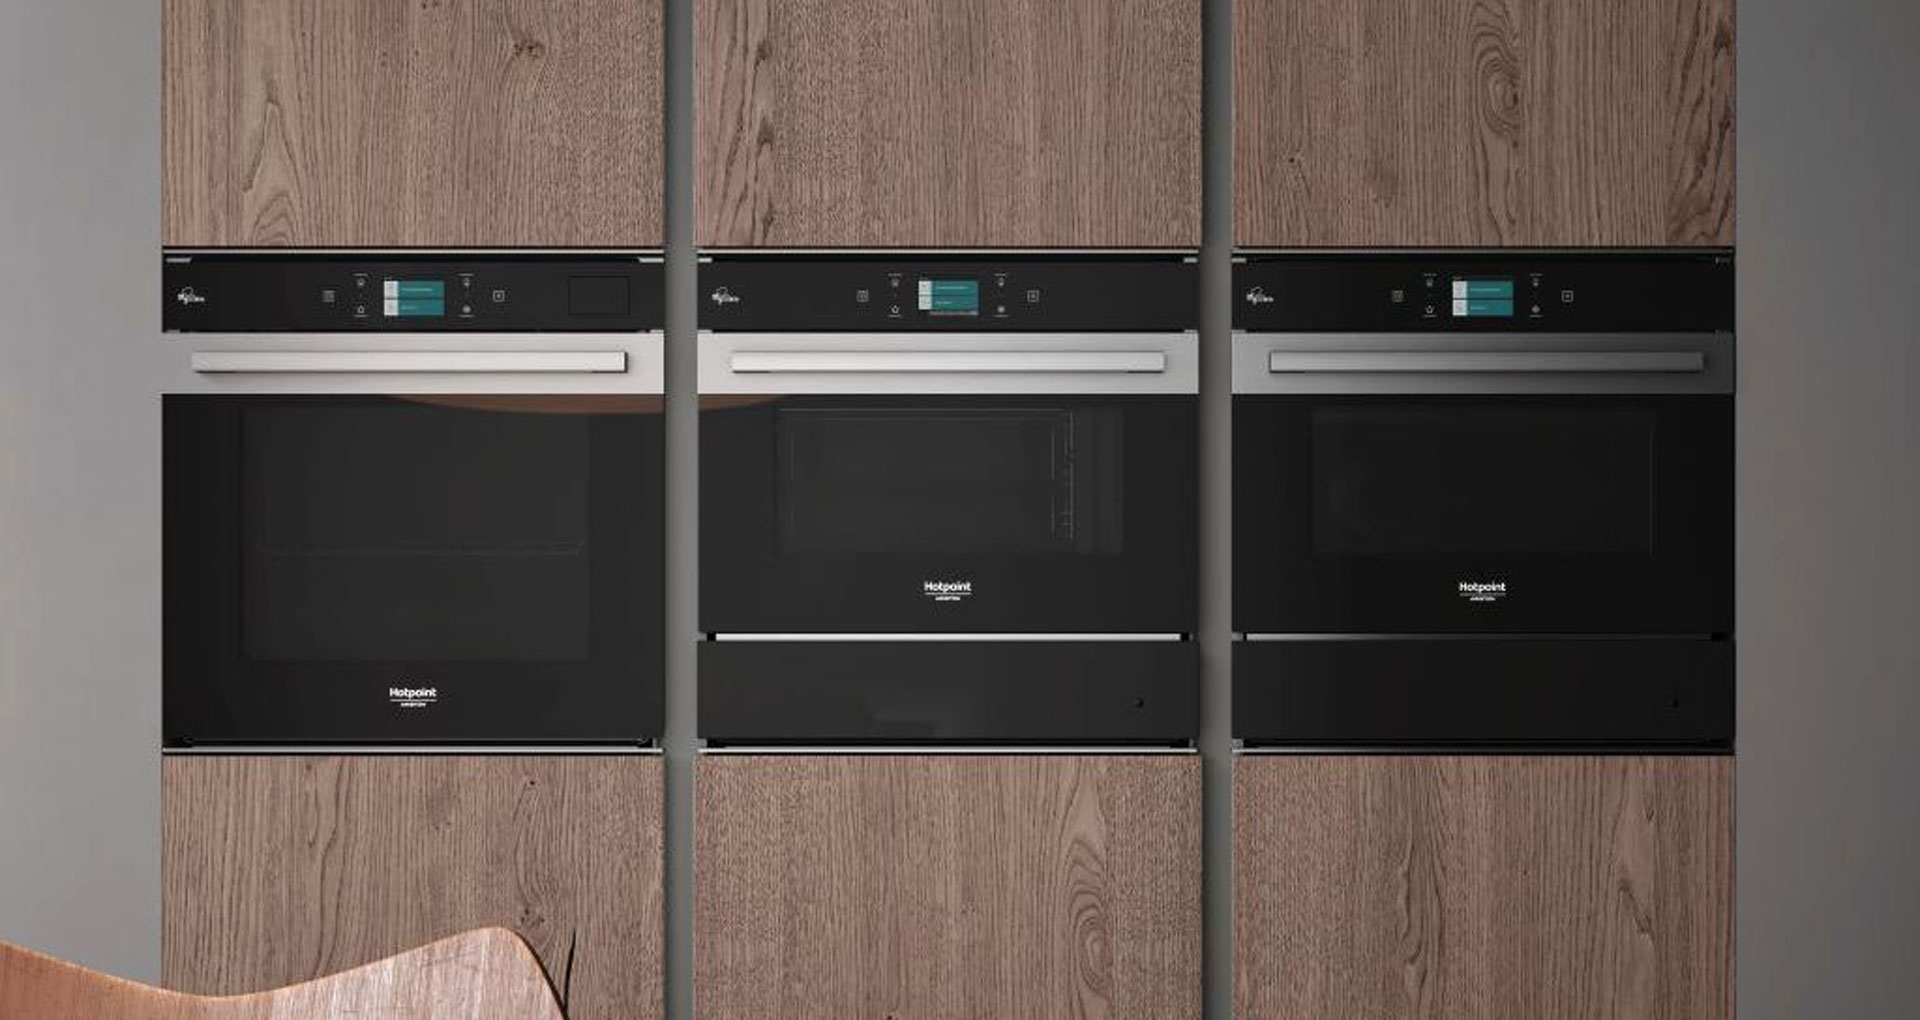 Active Steam100 by Hotpoint, the oven which combines traditional cooking with steam cooking